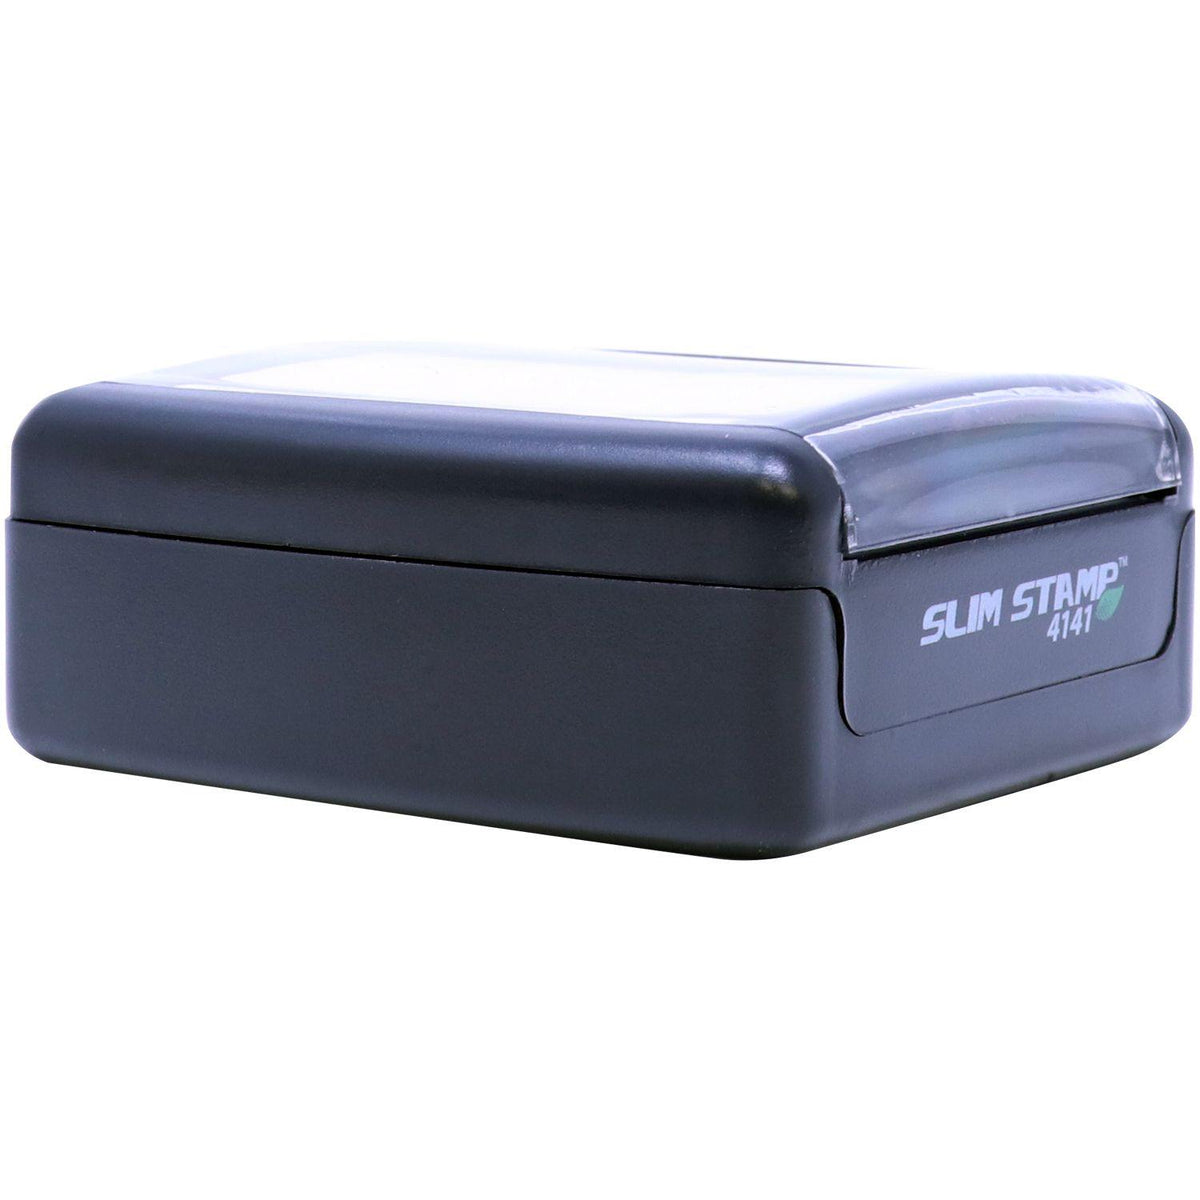 Public Weighmaster Slim Pre-Inked Rubber Stamp of Seal - Engineer Seal Stamps - Stamp Type_Pre-Inked, Type of Use_Professional